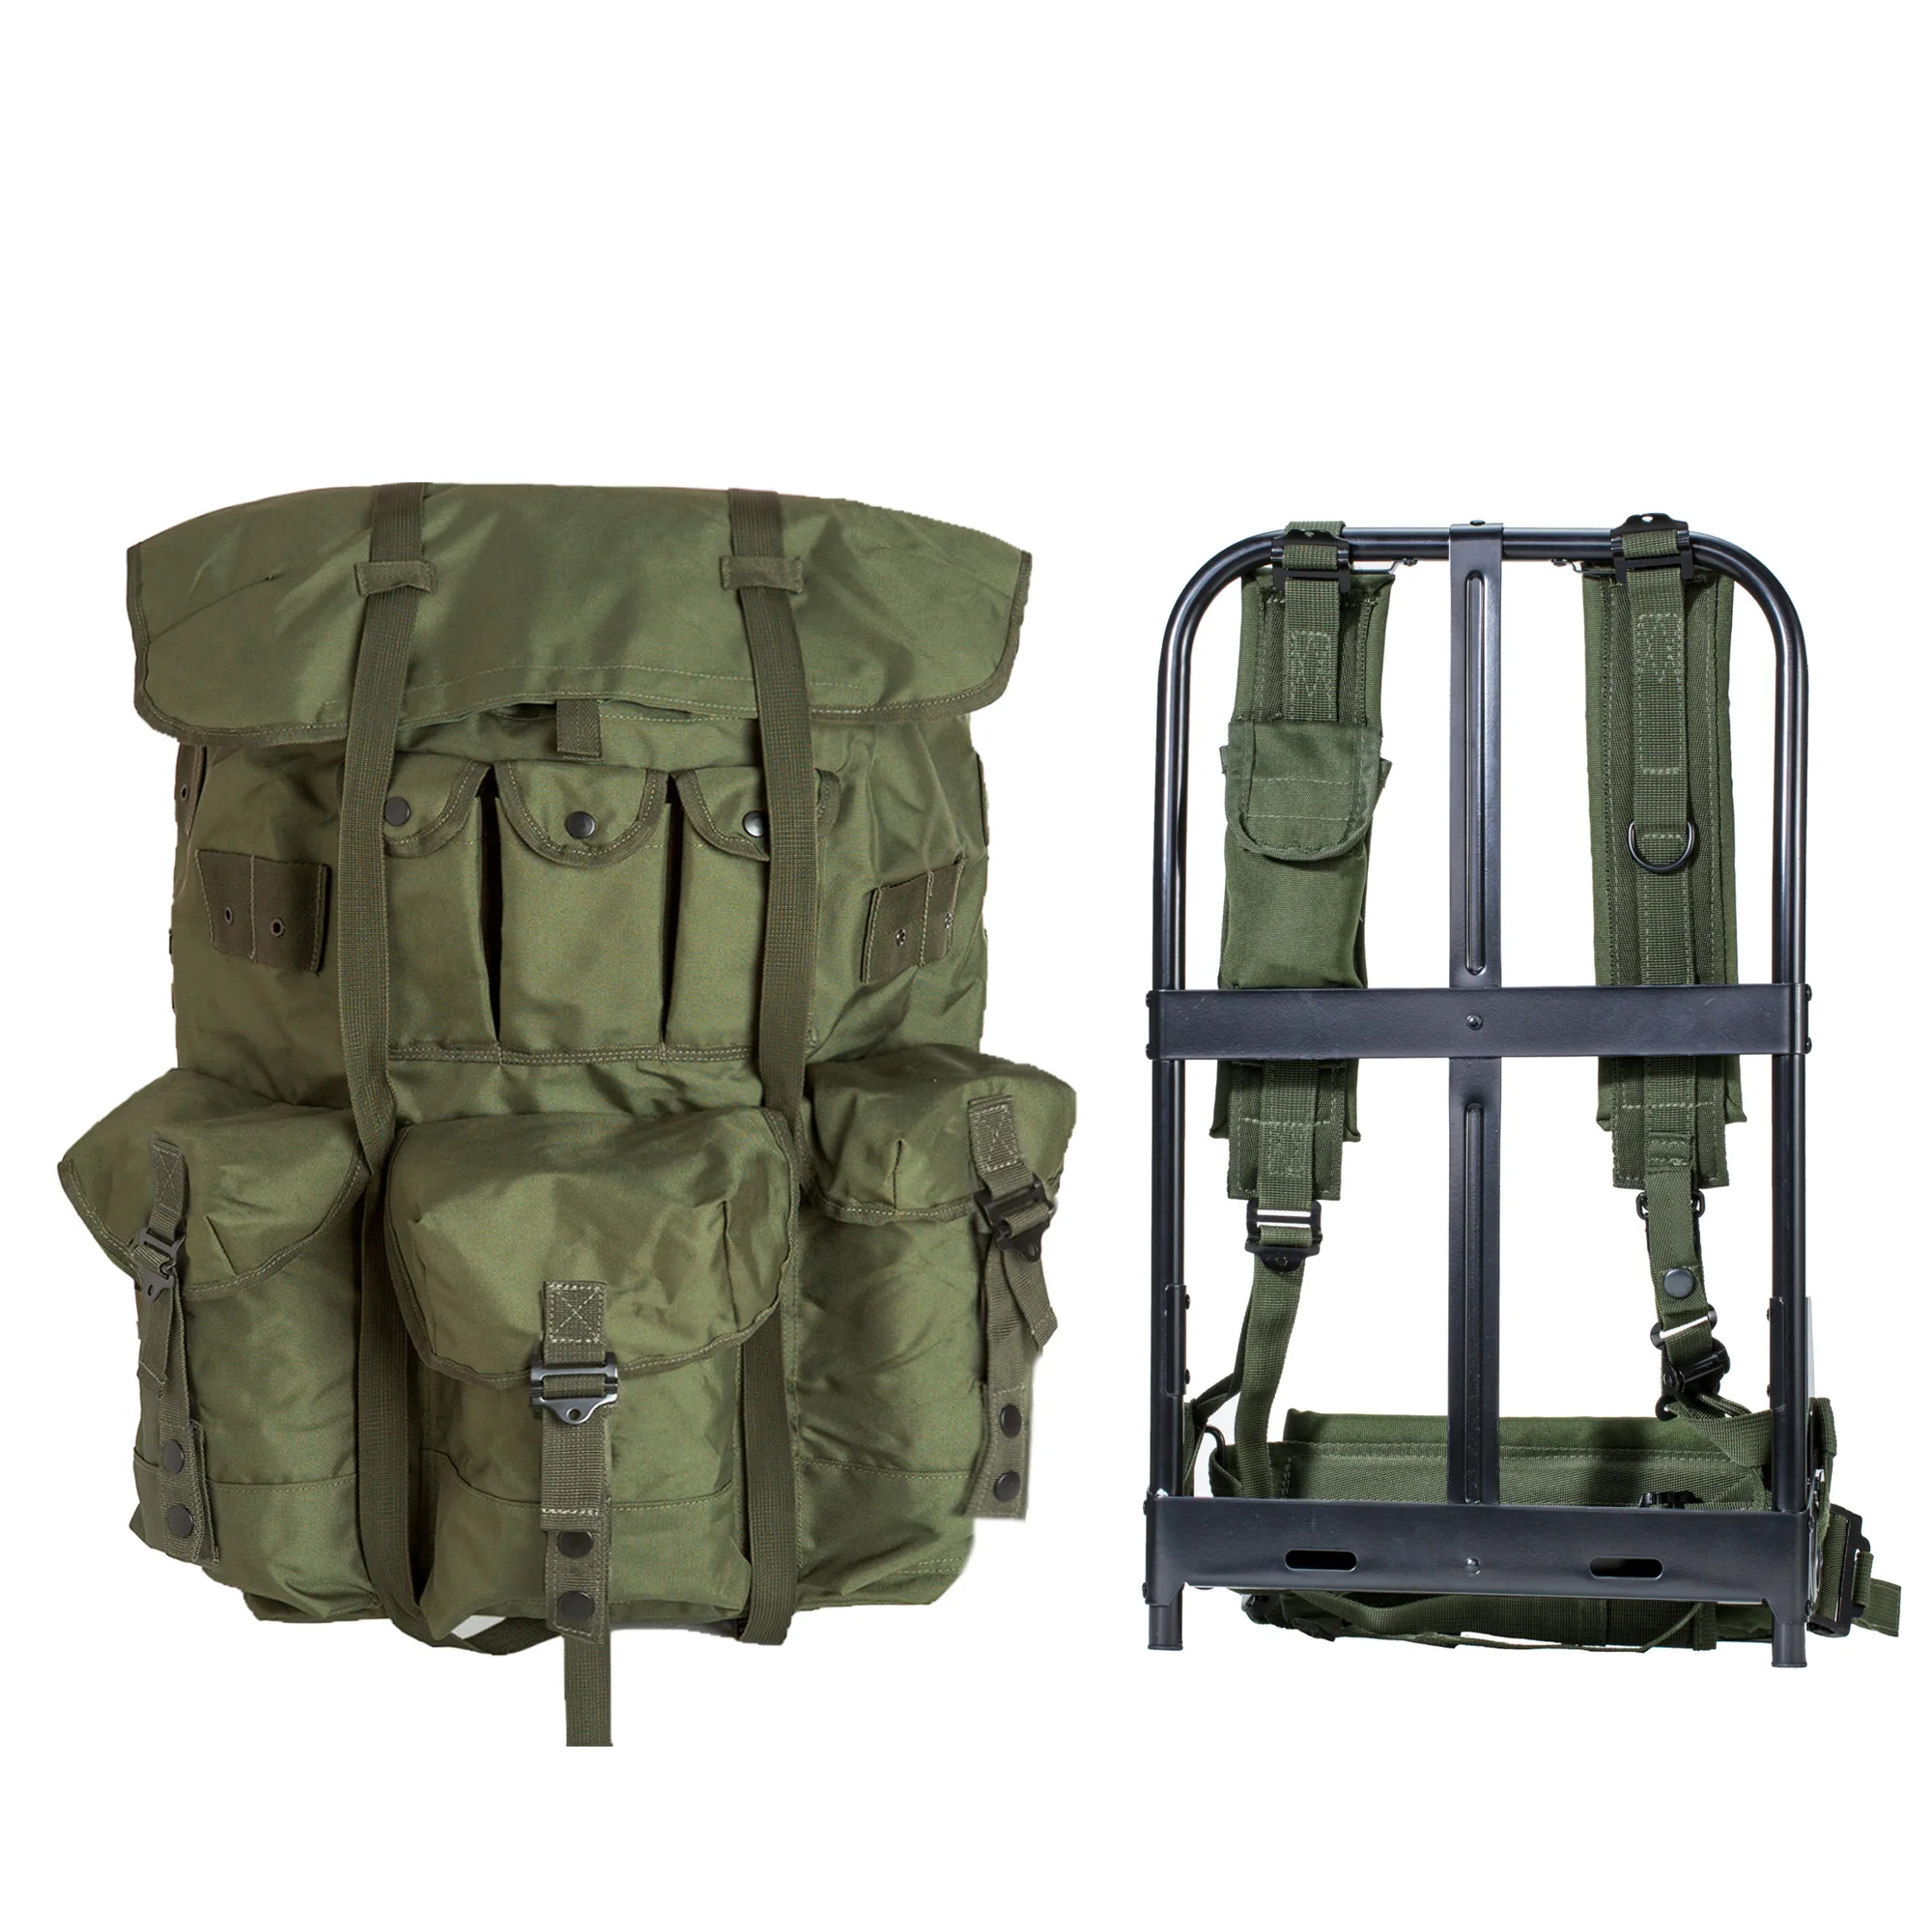 

U.S Military ALICE Backpack A.L.I.C.E. Field Pack Large Size Army Olive Drab, Olive green